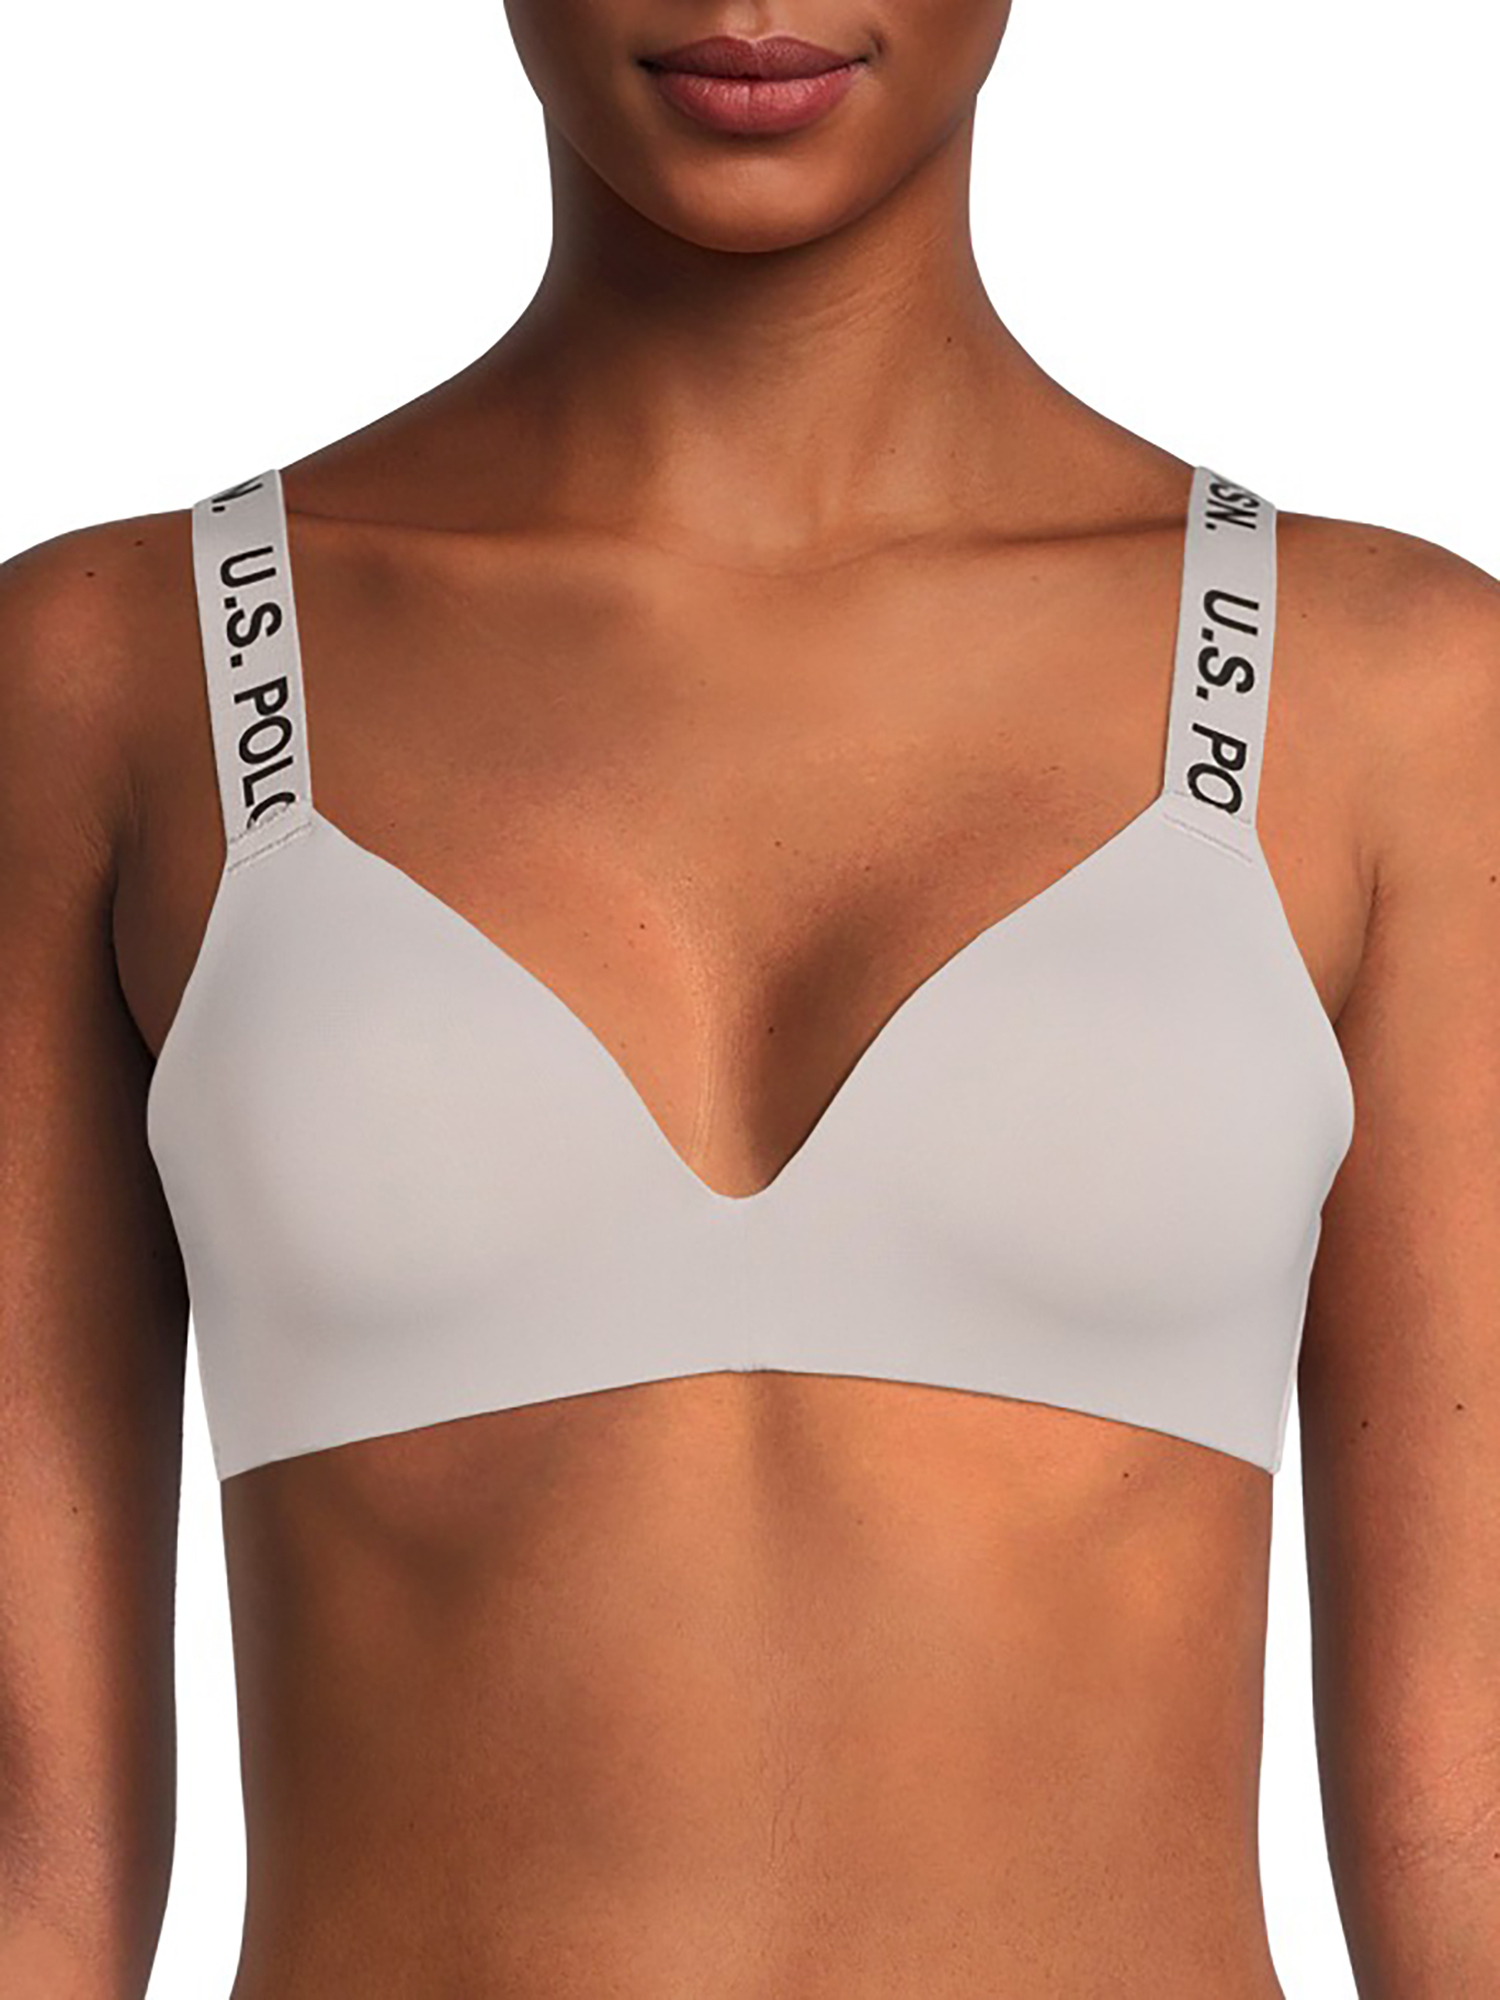 U.S. Polo Assn. Women's 2 Pack Tag-Free Microfiber Push Up Wire Free Bra Set - image 2 of 3